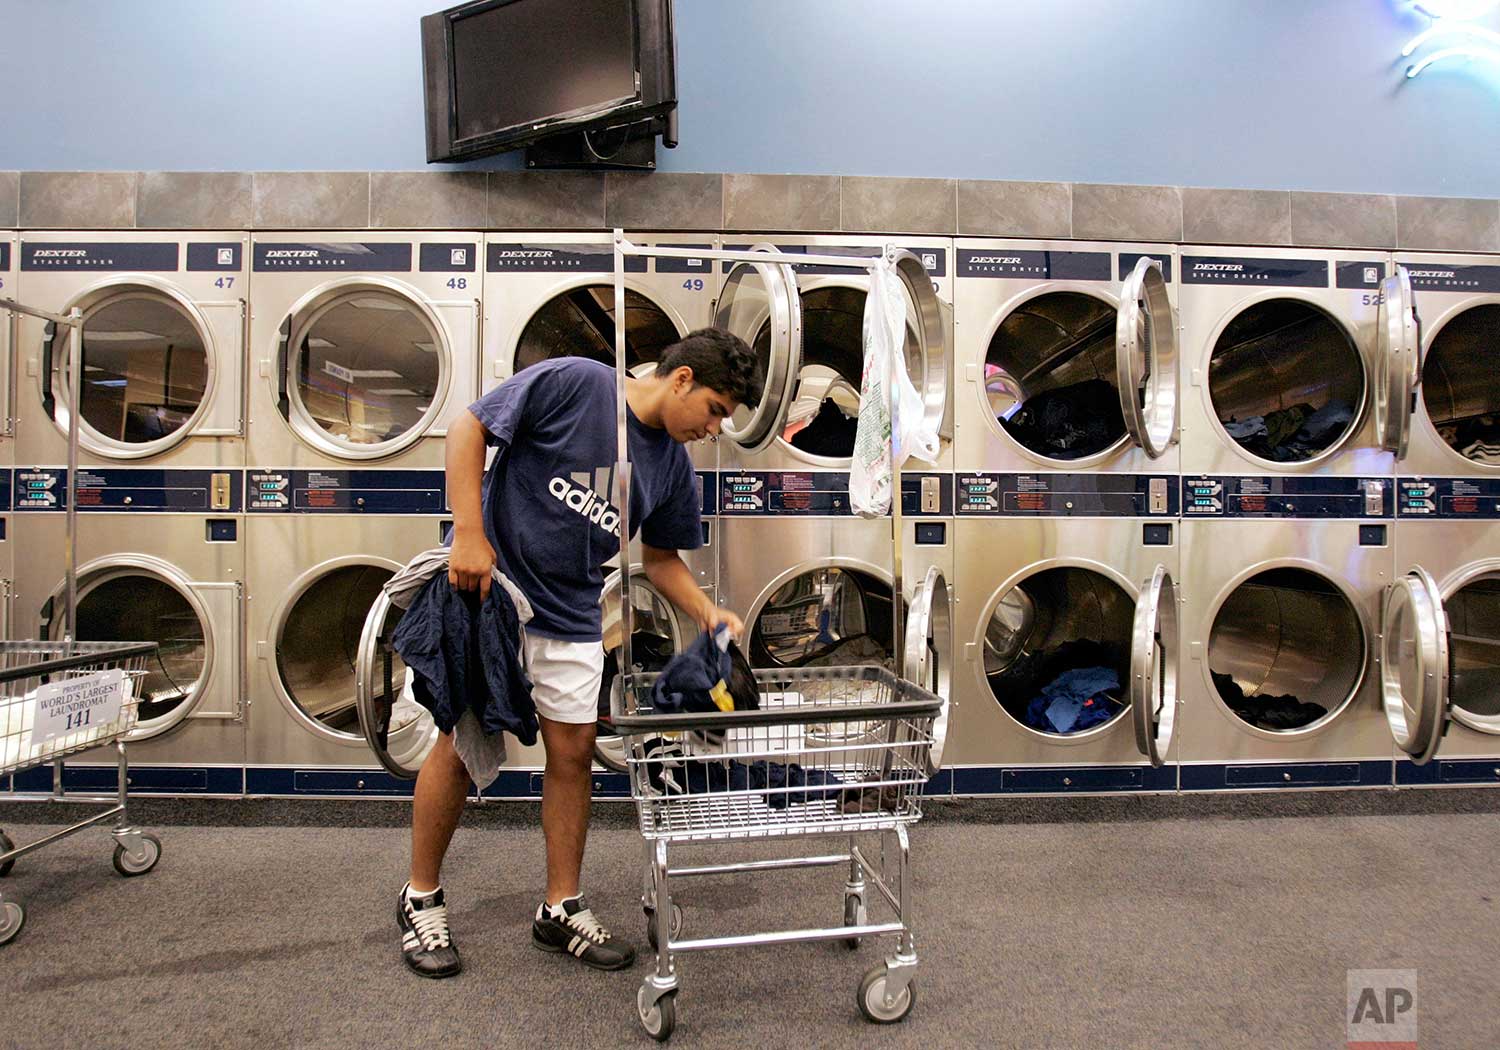 OTD in 1934, the first laundromat (called a "washateria") opened in Fort Worth, Texas. Giovanni Marron does his laundry at the "World's Largest Laundromat" in Berwyn, Ill., Wednesday, July 26, 2006. | Photo Brian Kersey